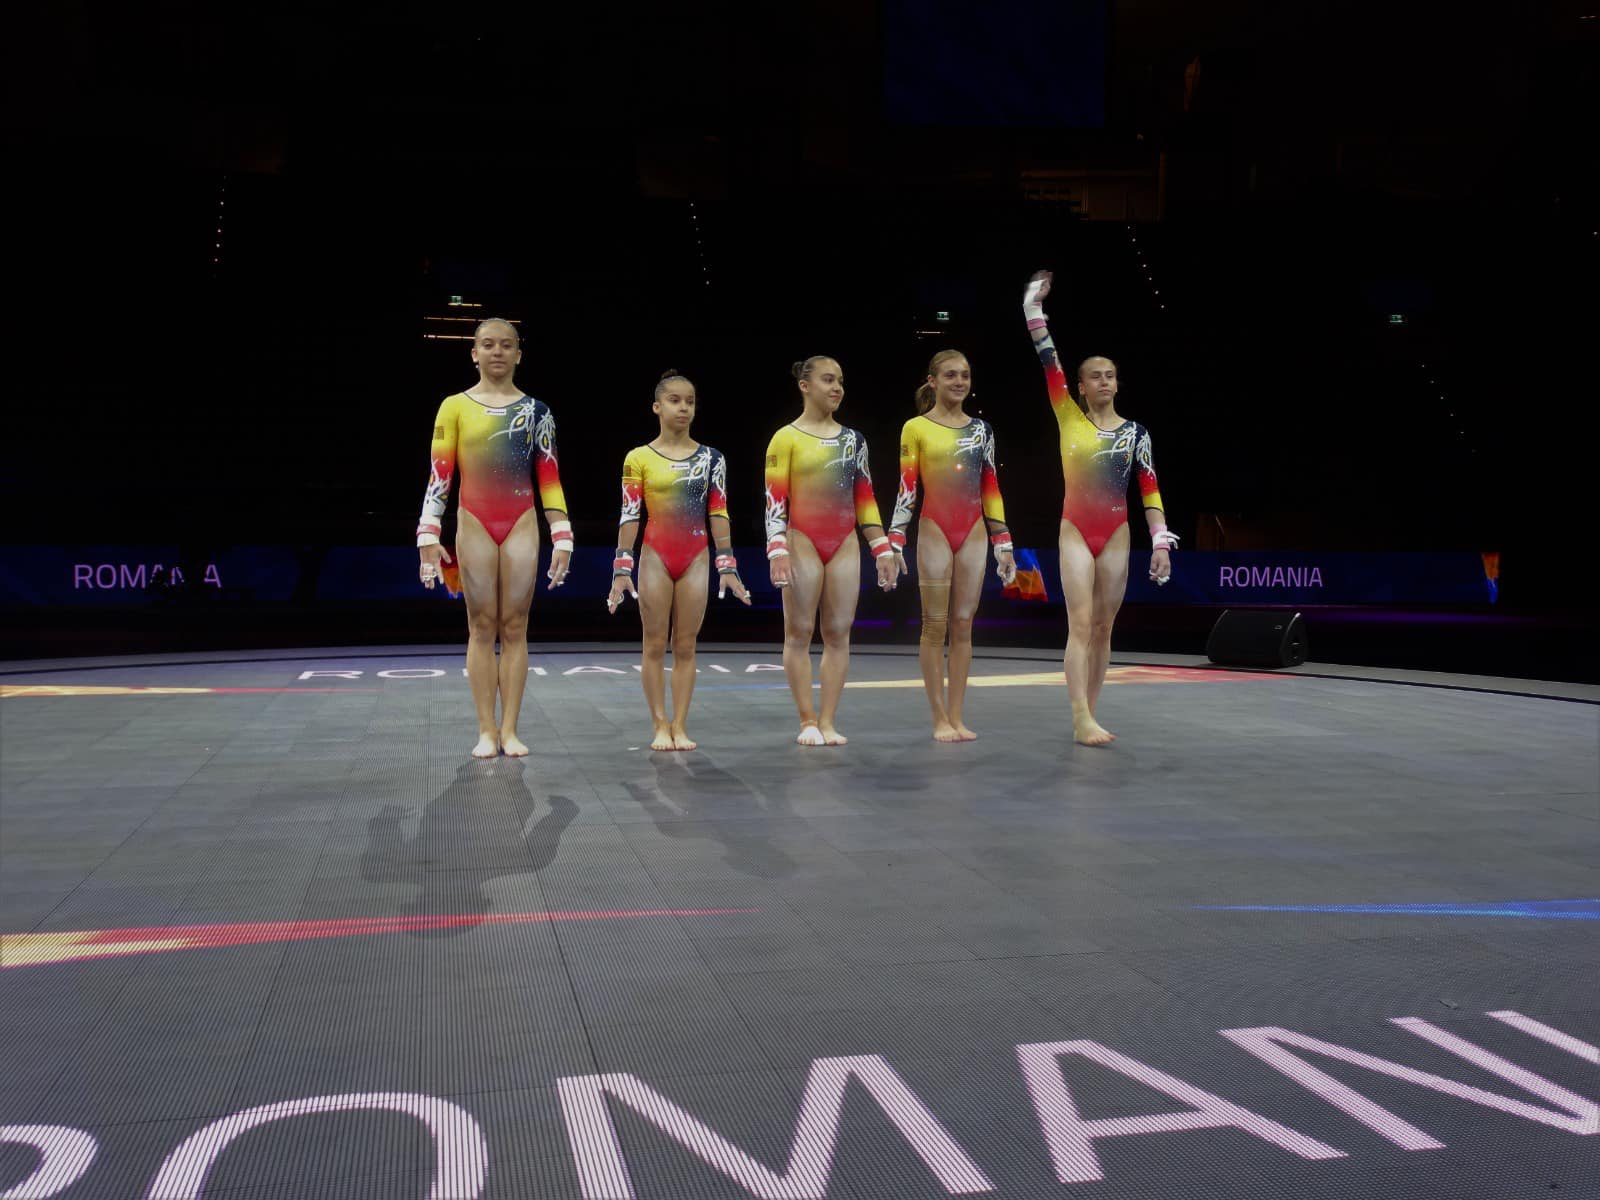 Romania's junior gymnasts win six medals in the 2022 European Championships